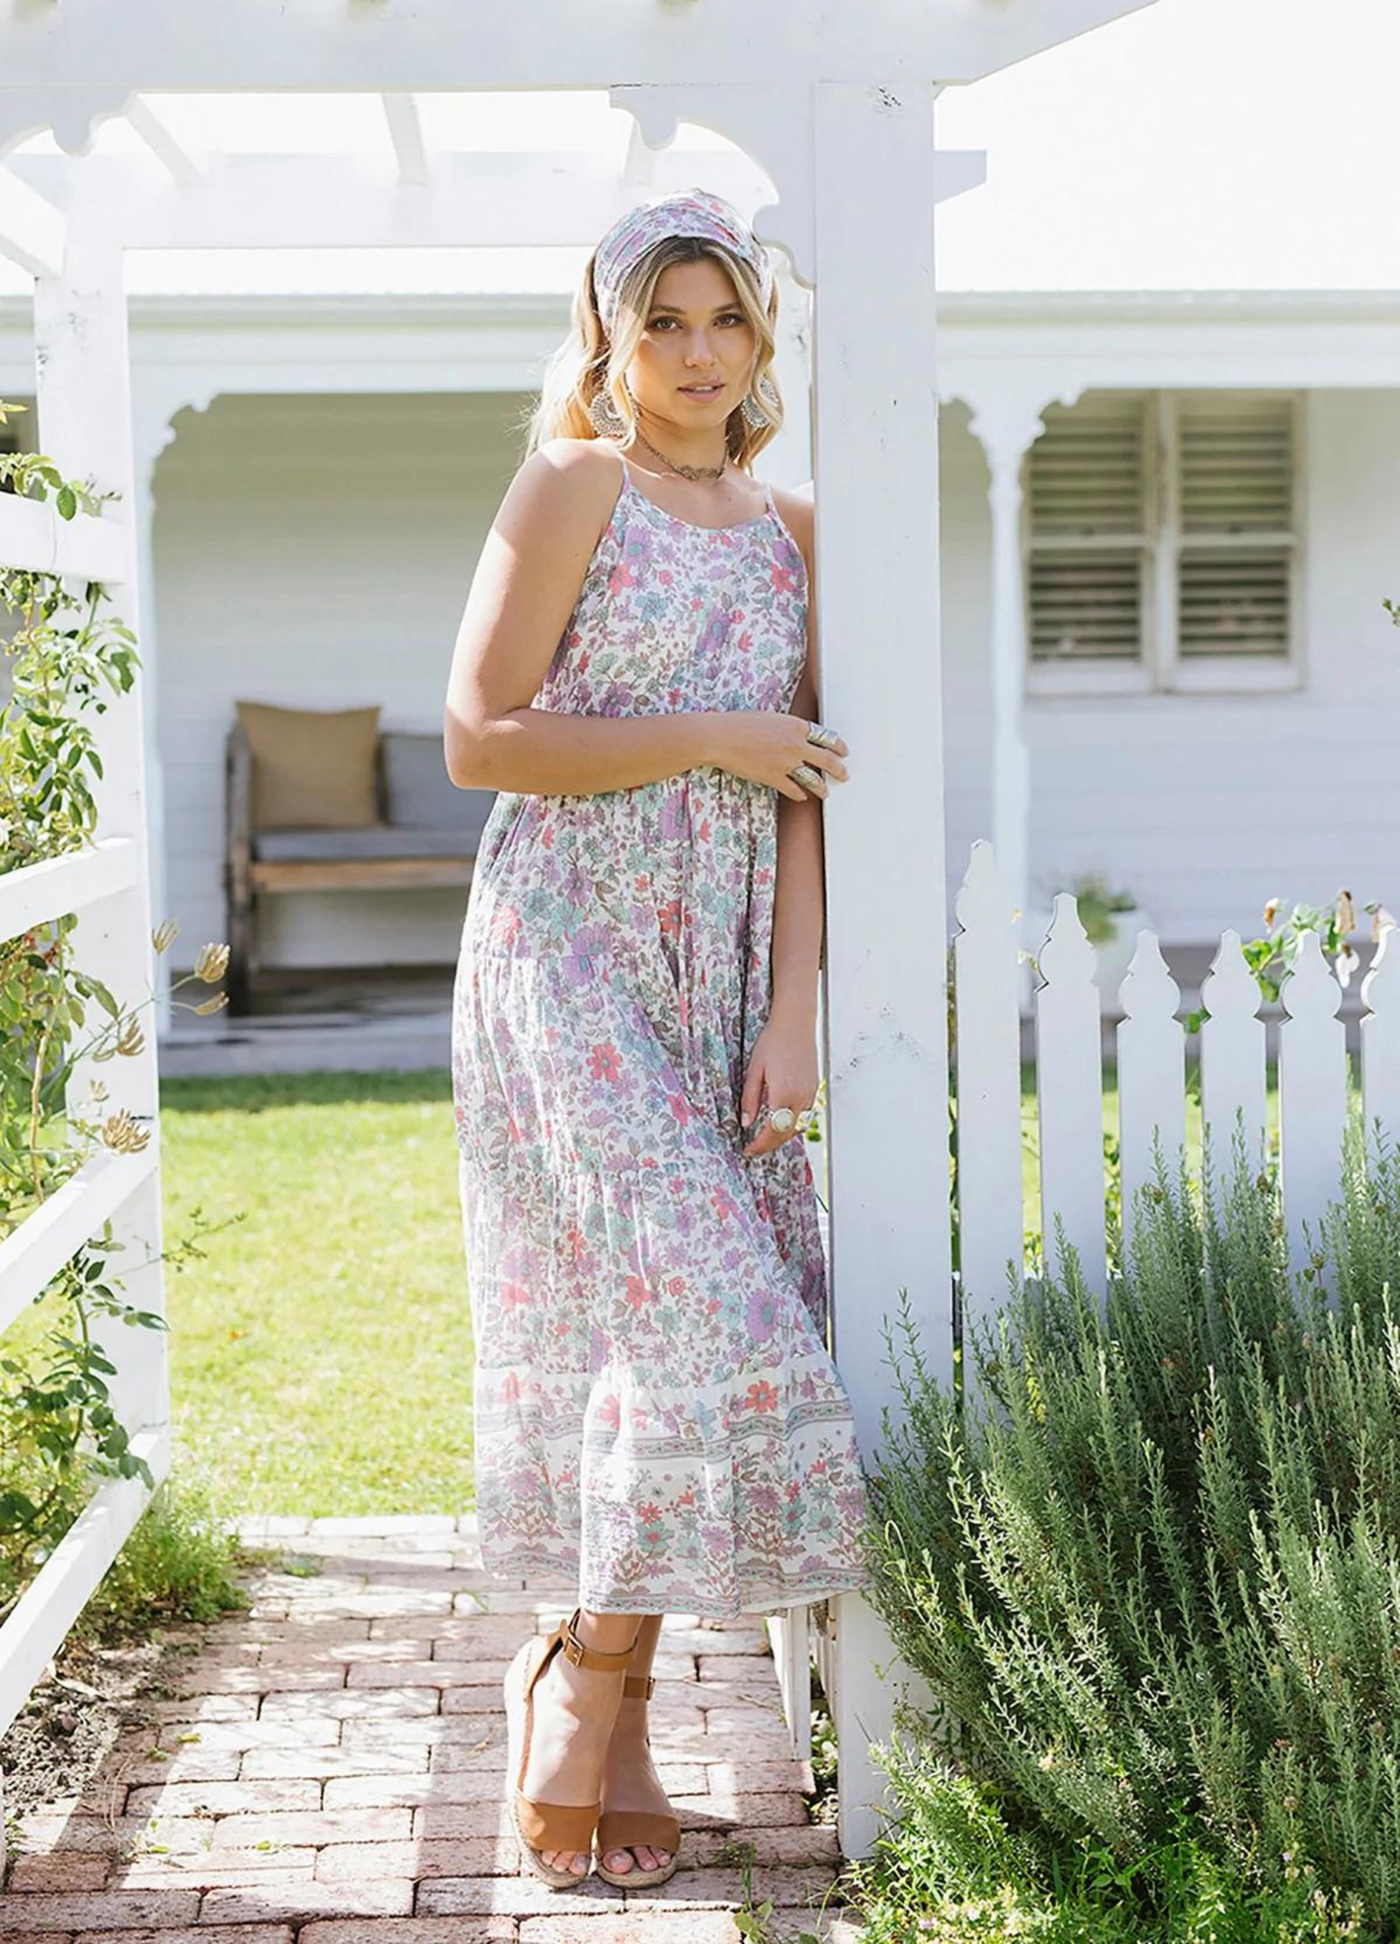 Blonde model wearing the house of skye bloom maxi dress a border print dress with straps and a floral print design in lilac